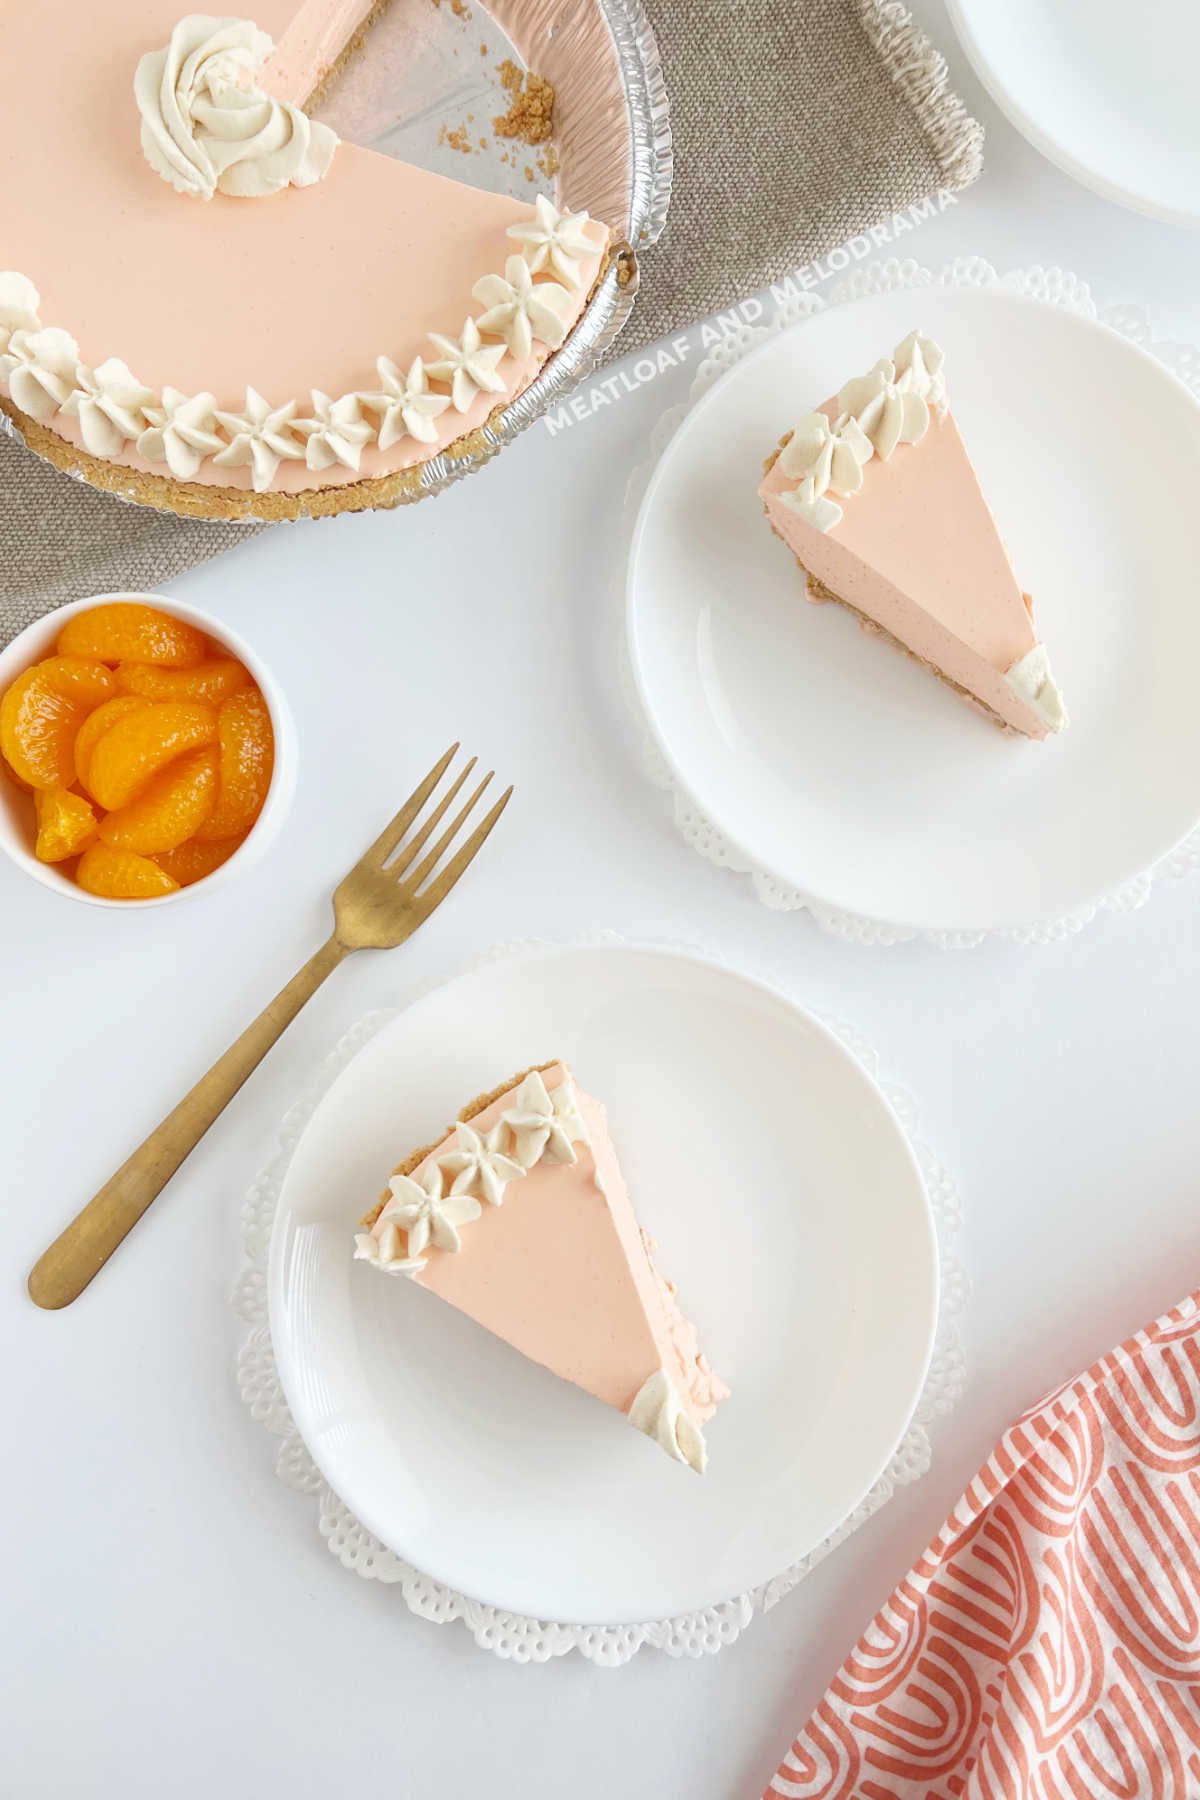 jello creamsicle pie with whipped cream and mandarin oranges on table